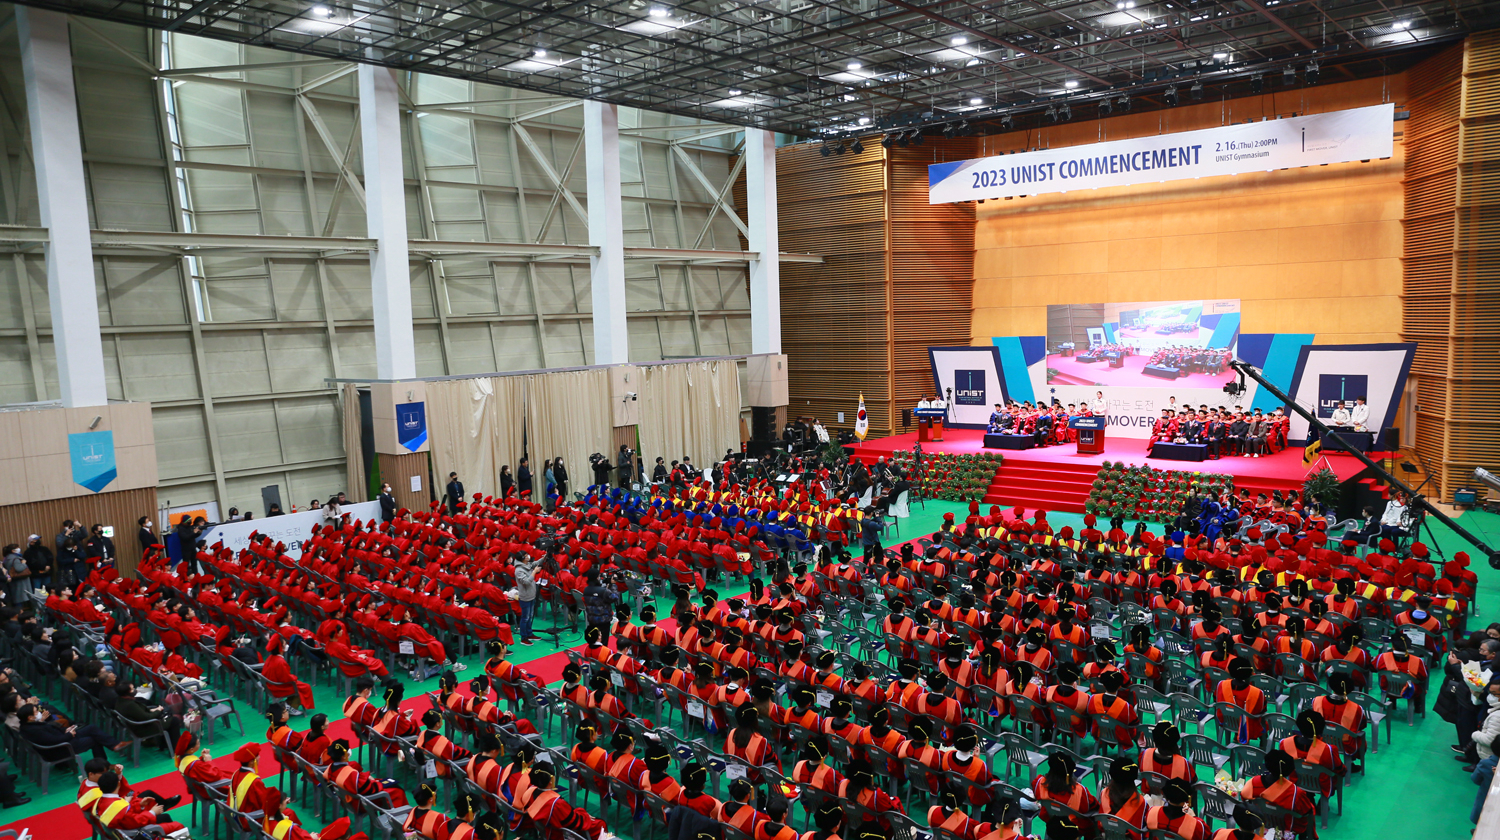 The 2023 UNIST Commencement Ceremony took place in the UNIST Gymnasium on February 16, 2023.